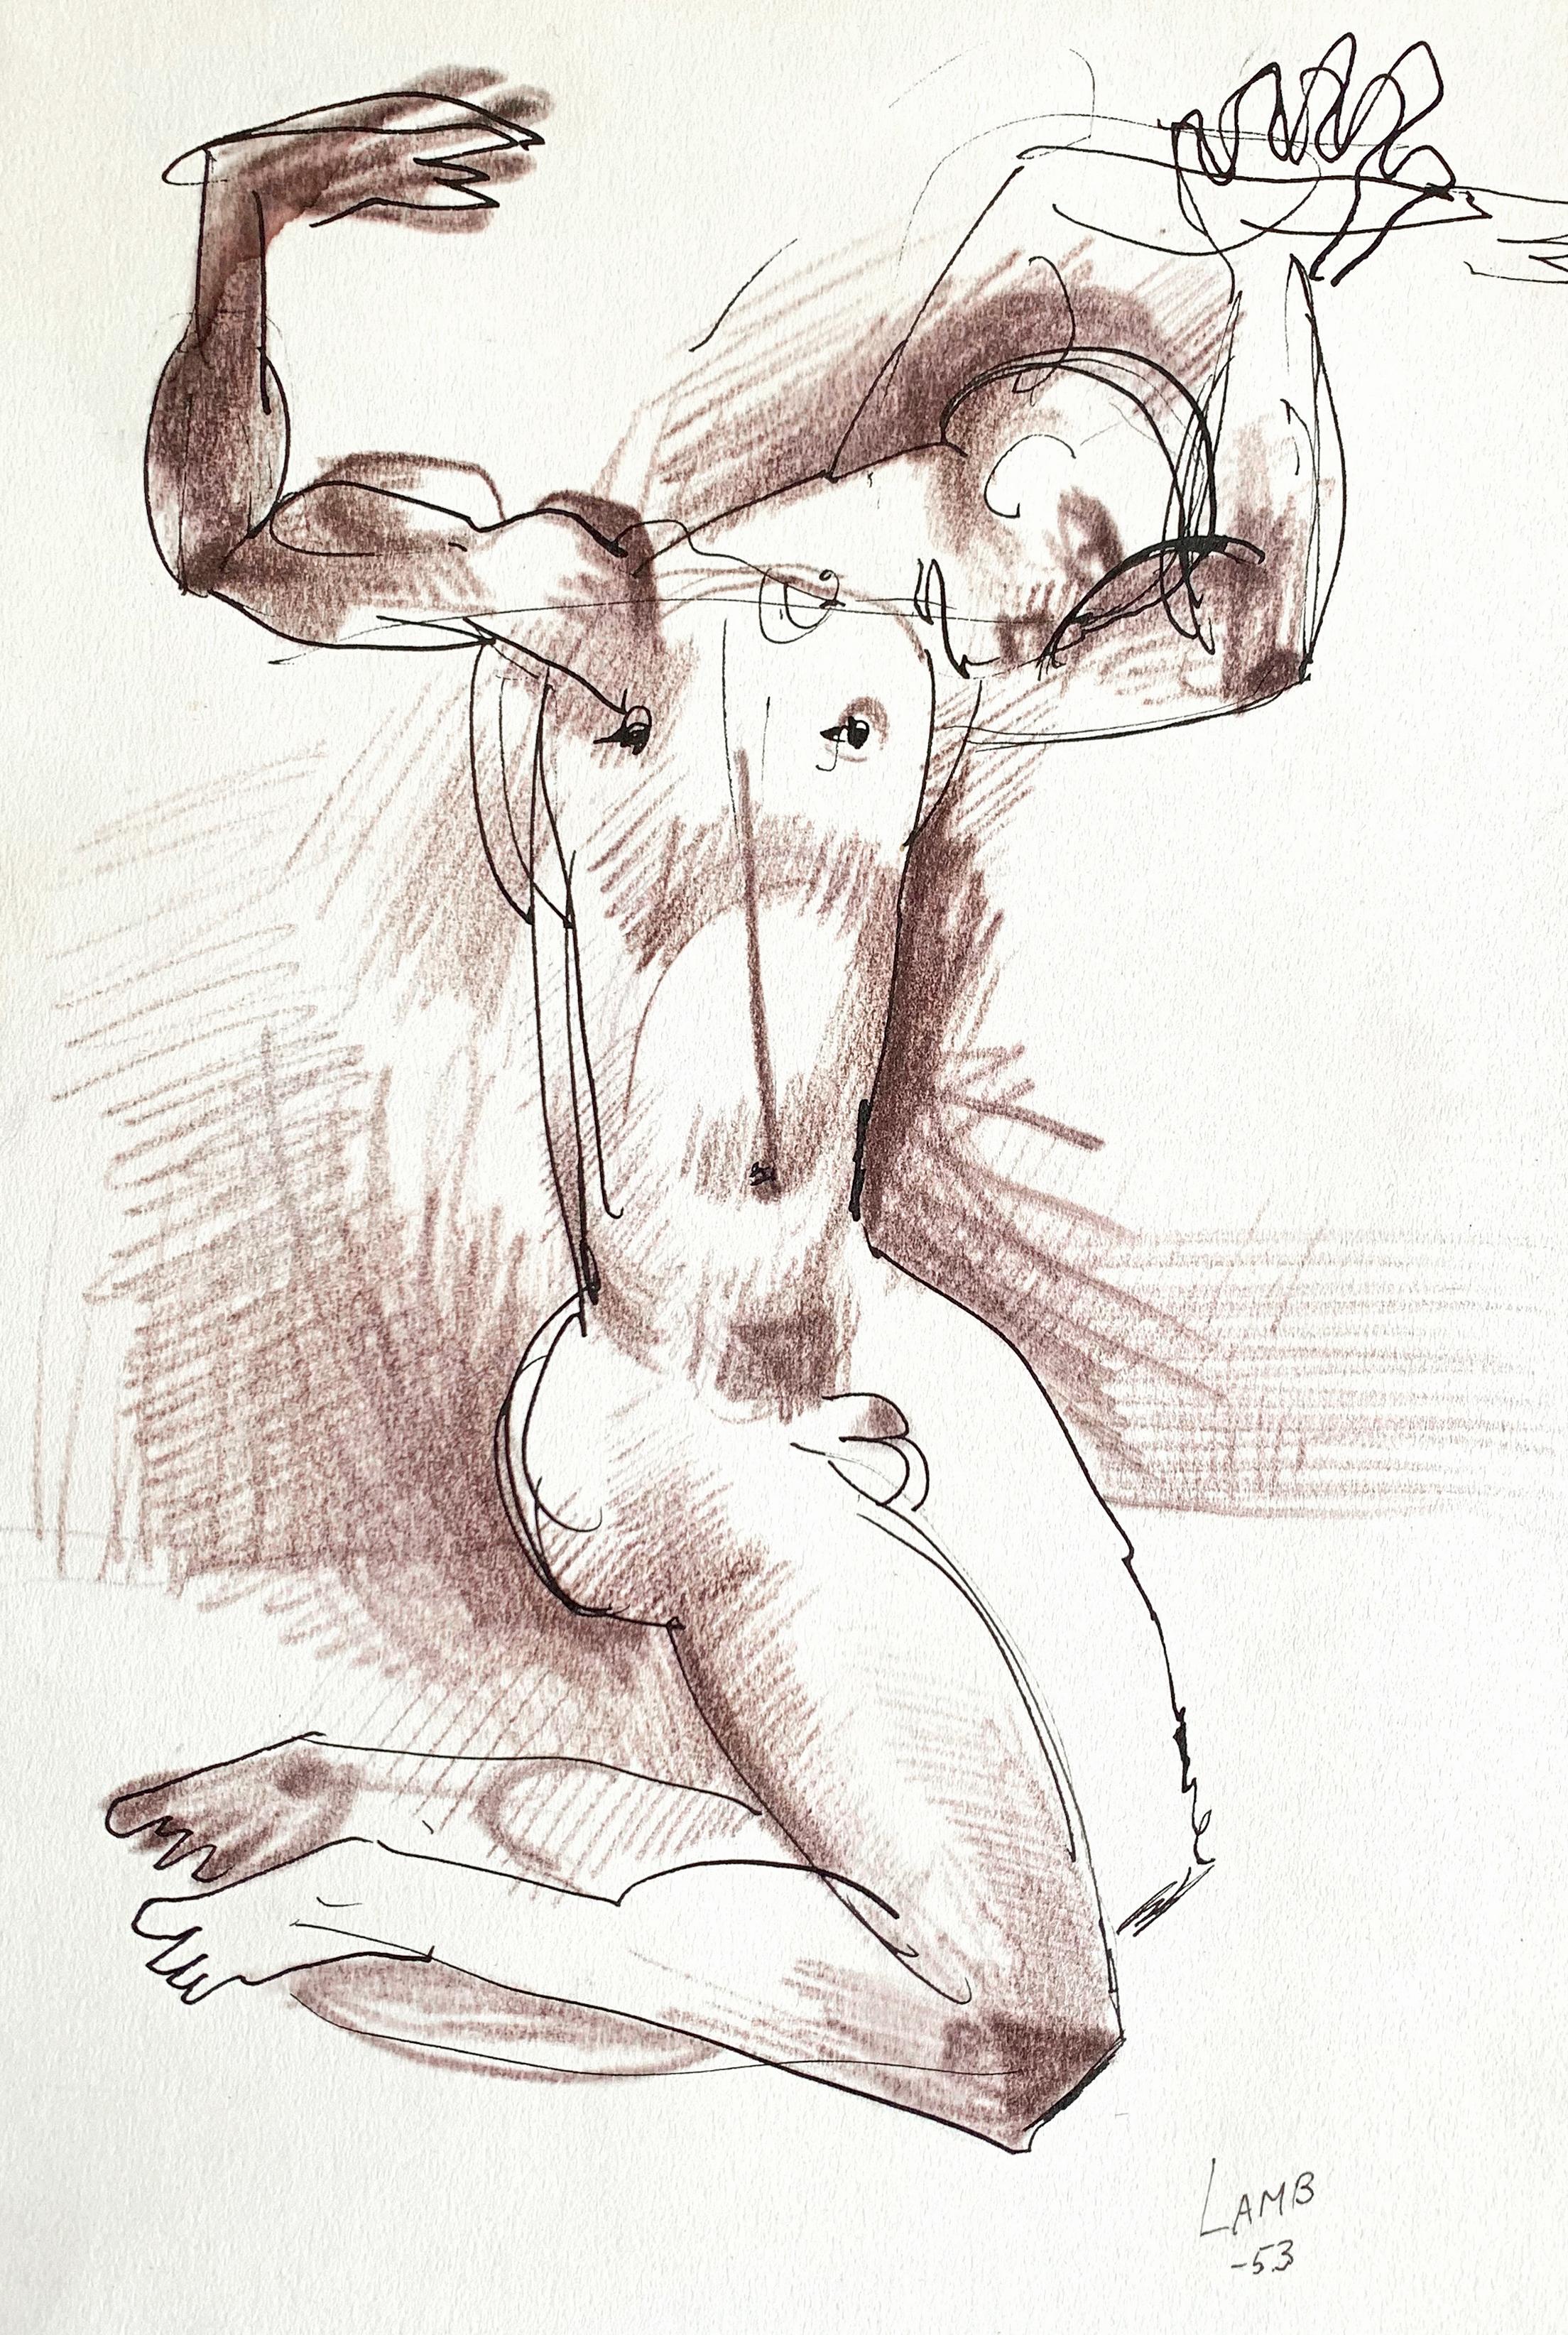 Stark and sensuous at the same time, this drawing was made by Robert Lamb in 1953, shortly after he graduated from the prestigious Rhode Island School of Design. Although primarily known for teaching sculpture at Cornell University and RISD, and for